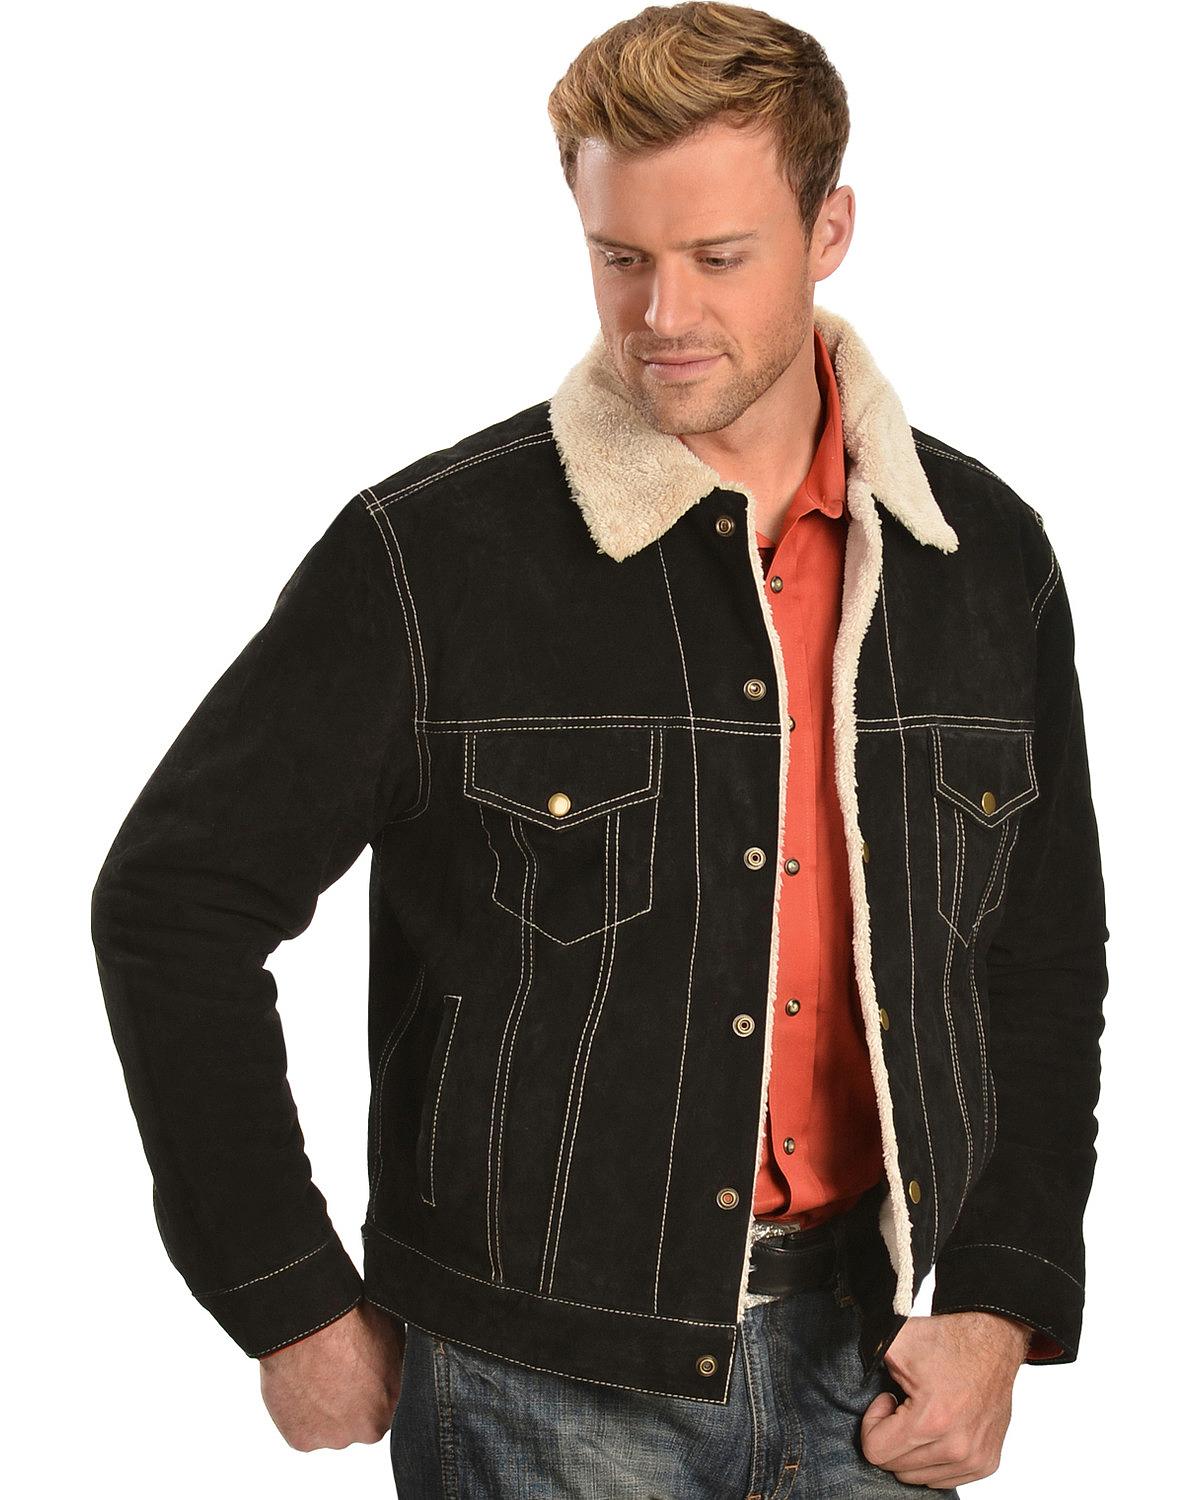 Men's Sherpa Lined Suede Leather Jacket